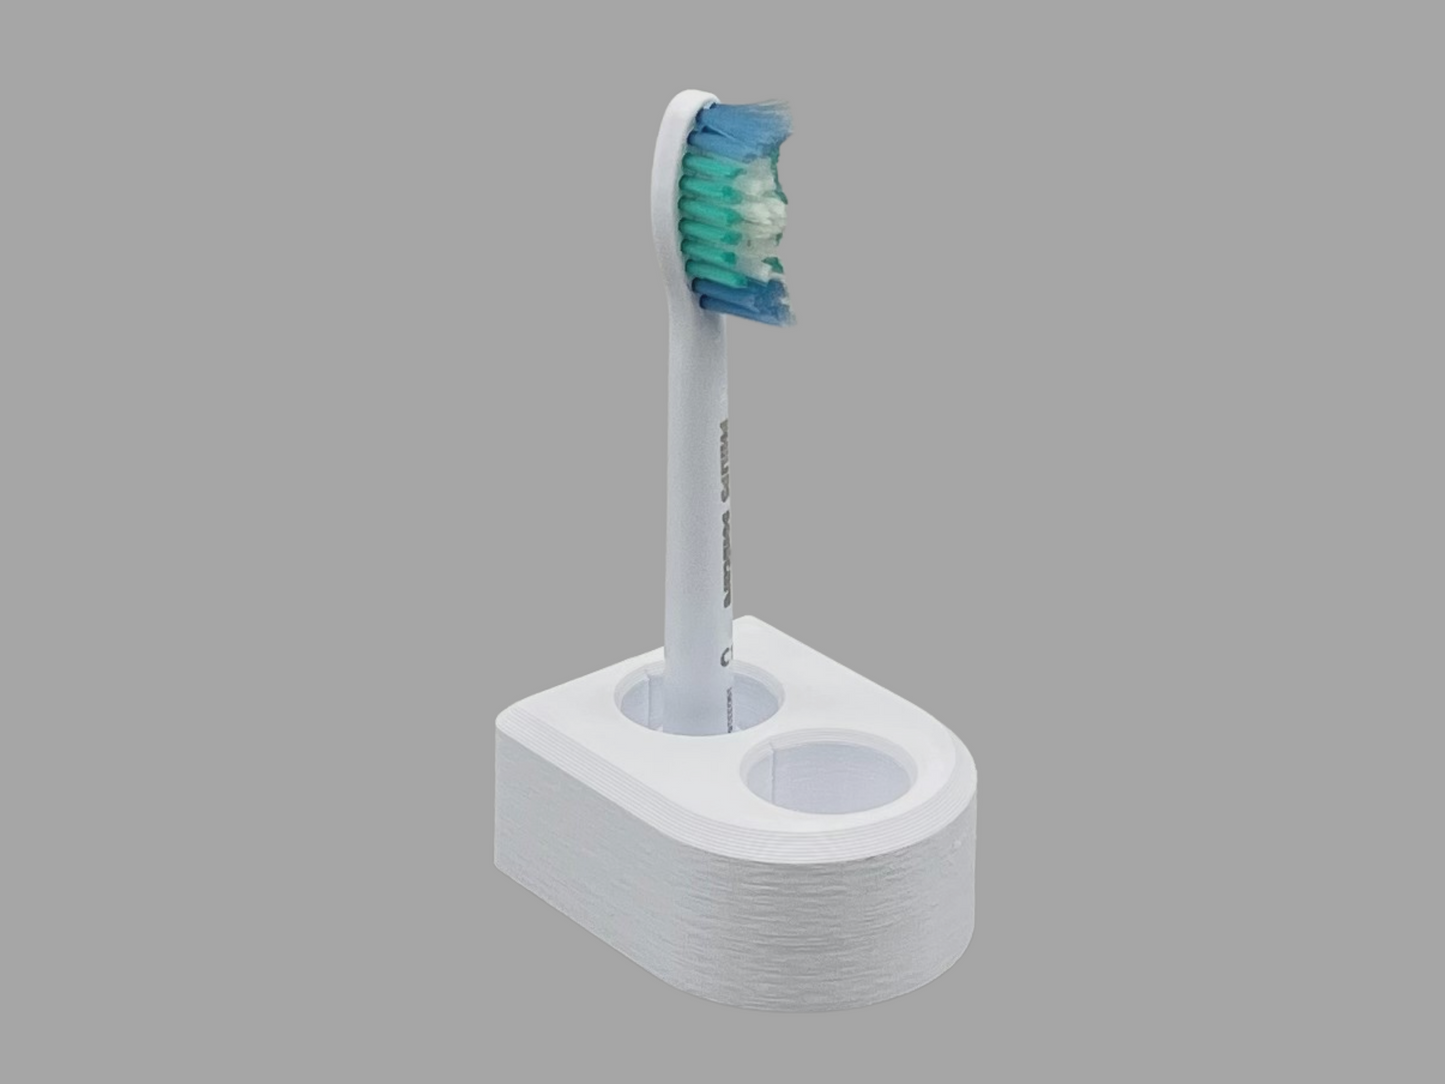 Oral-B Philips Sonicare Electric Toothbrush Brush Head Holder Replacement Countertop